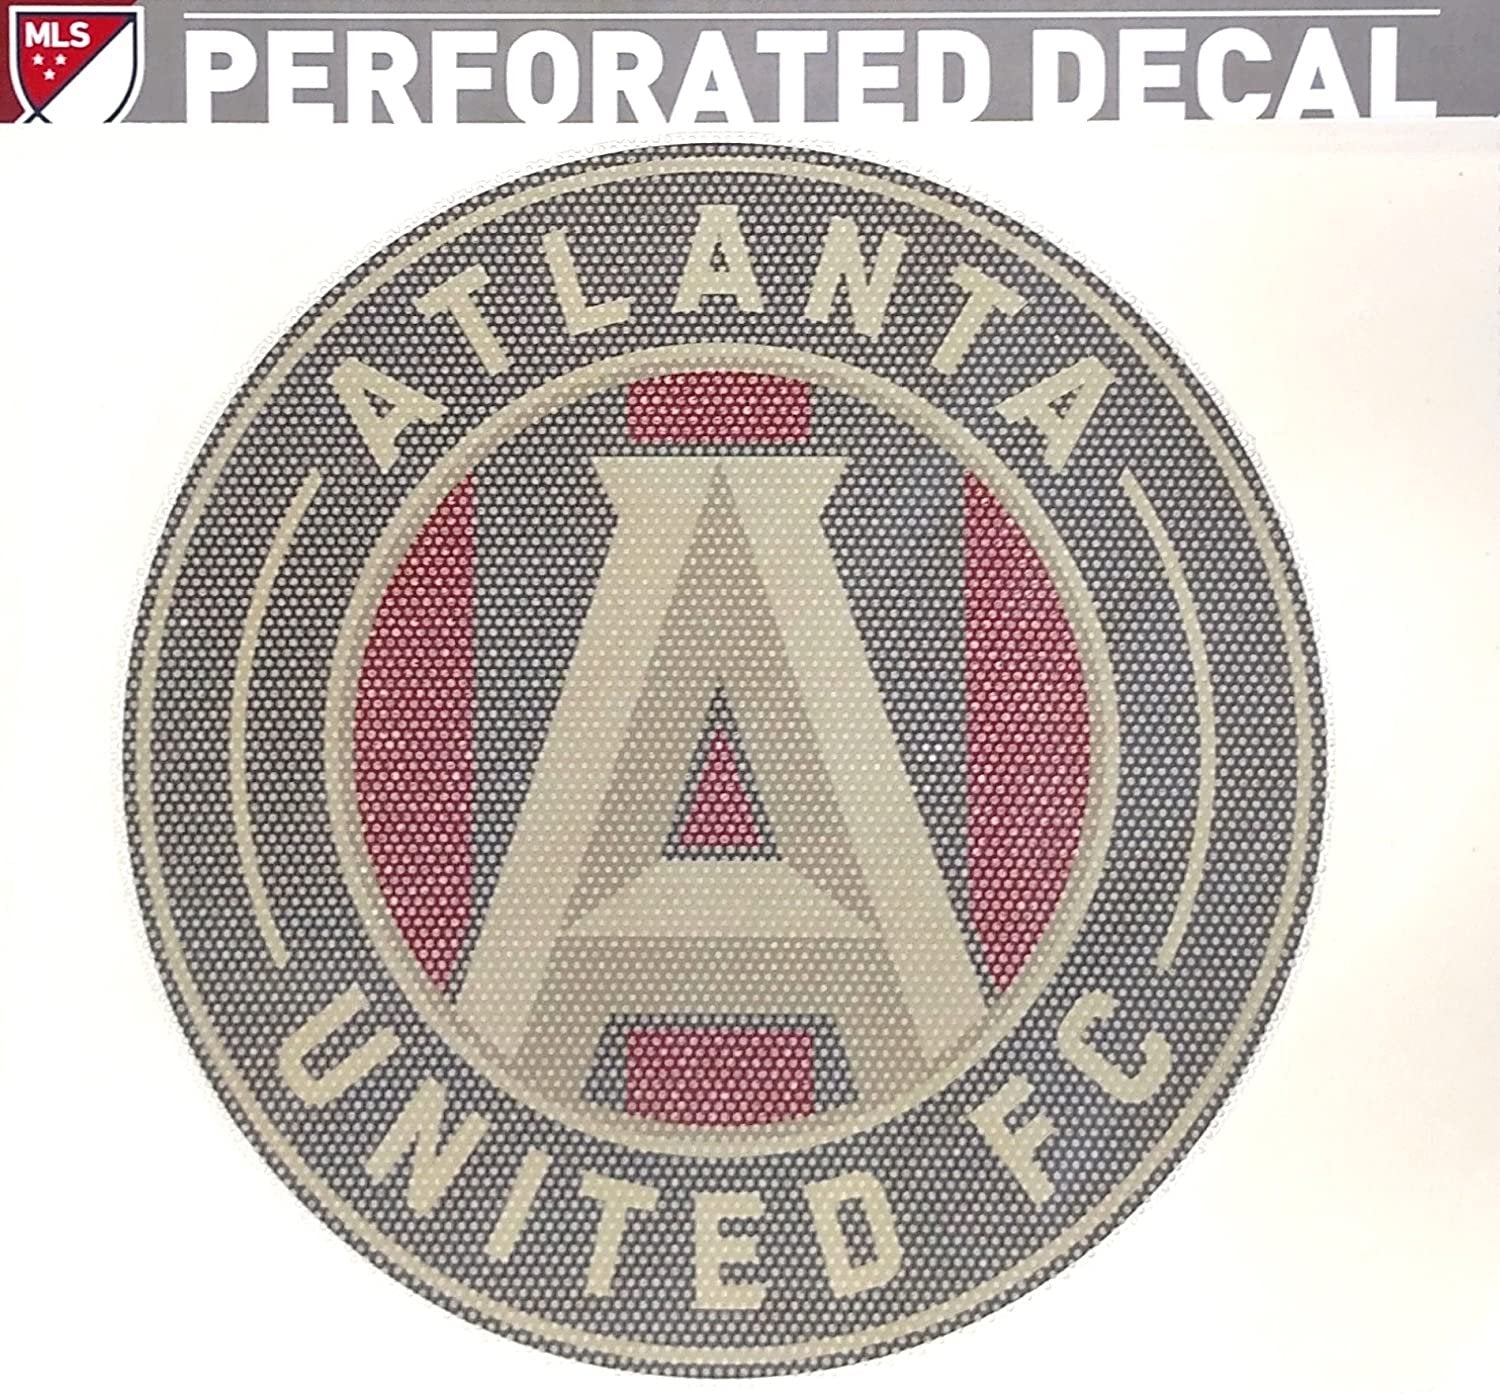 Atlanta United FC 8 Inch Preforated Window Film Decal Sticker, One-Way Vision, Adhesive Backing